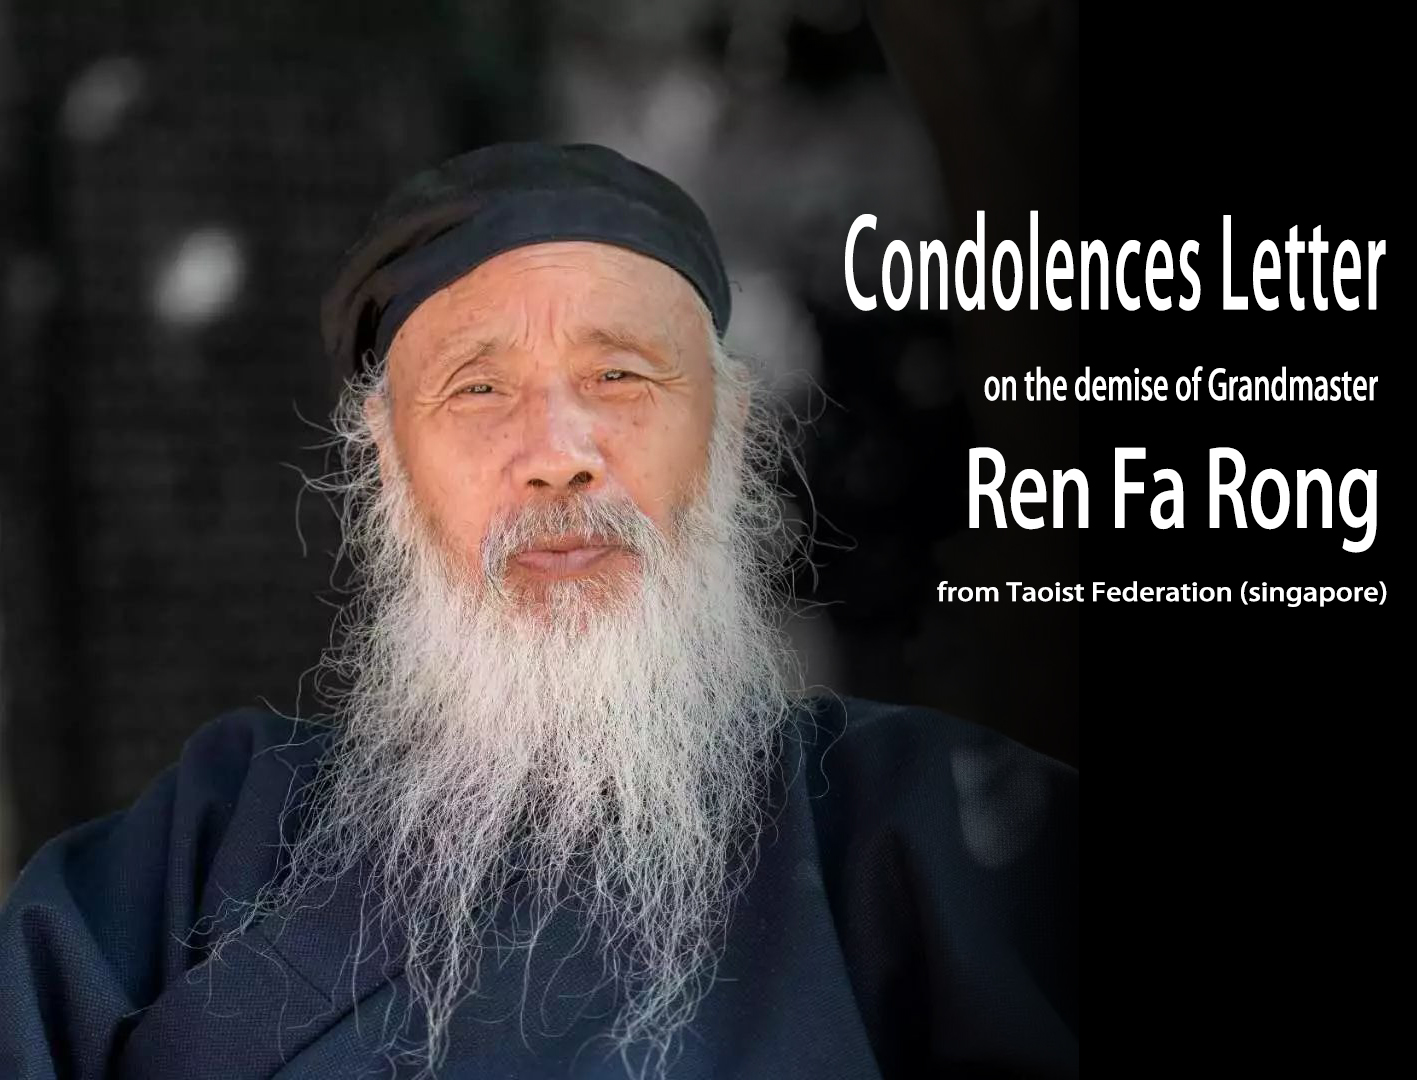 Condolences Letter on the demise of Grandmaster Ren Fa Rong from Taoist Federation (singapore)